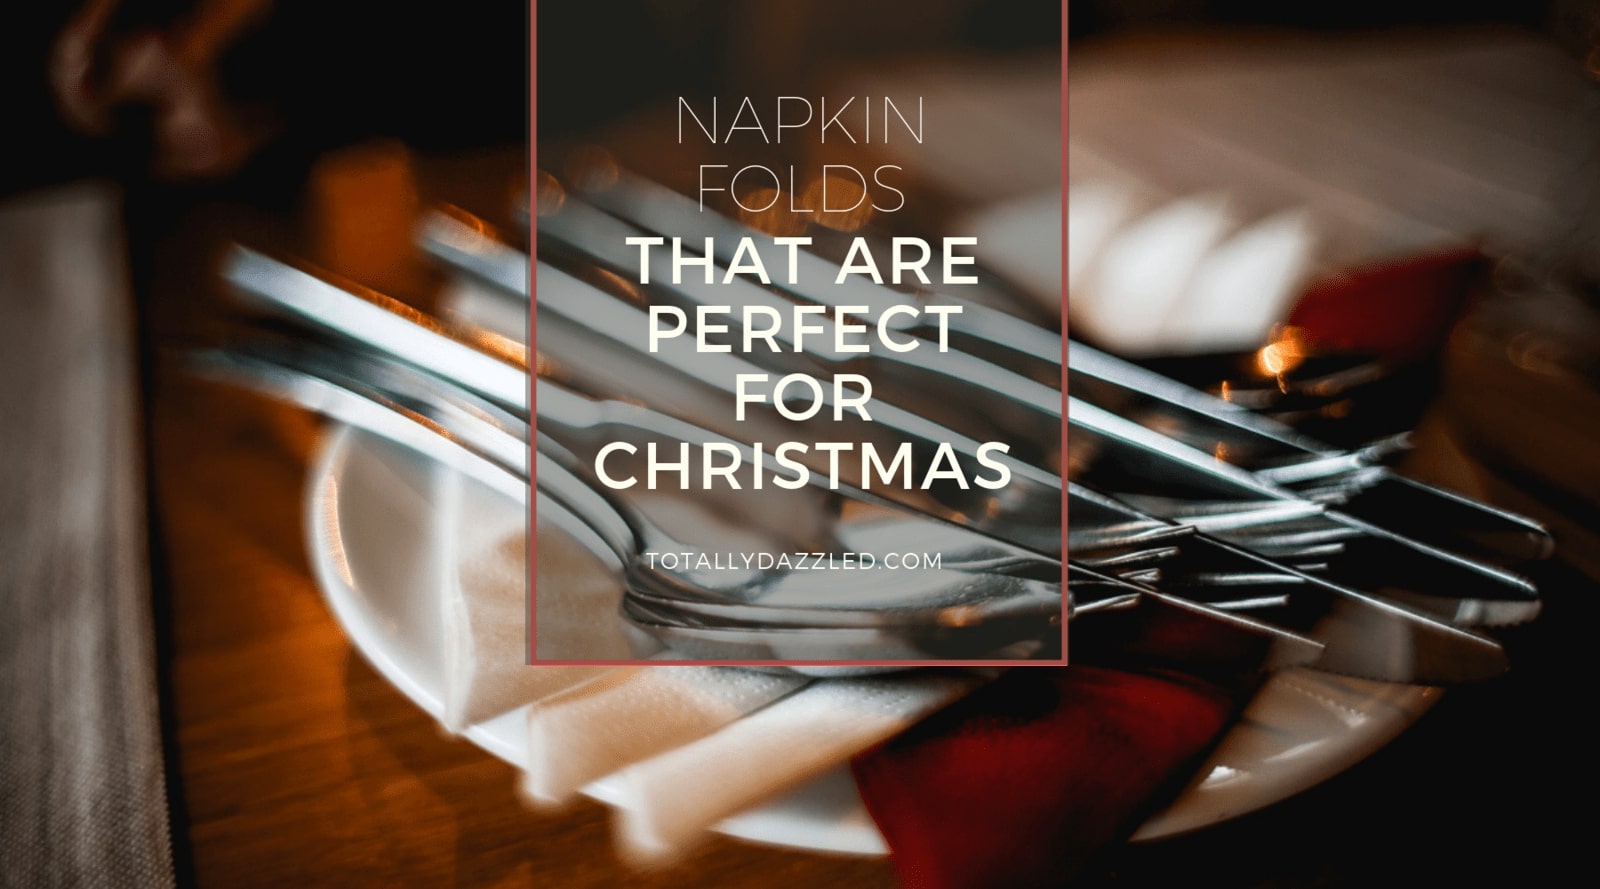 Napkin Folds That Are Perfect For Christmas